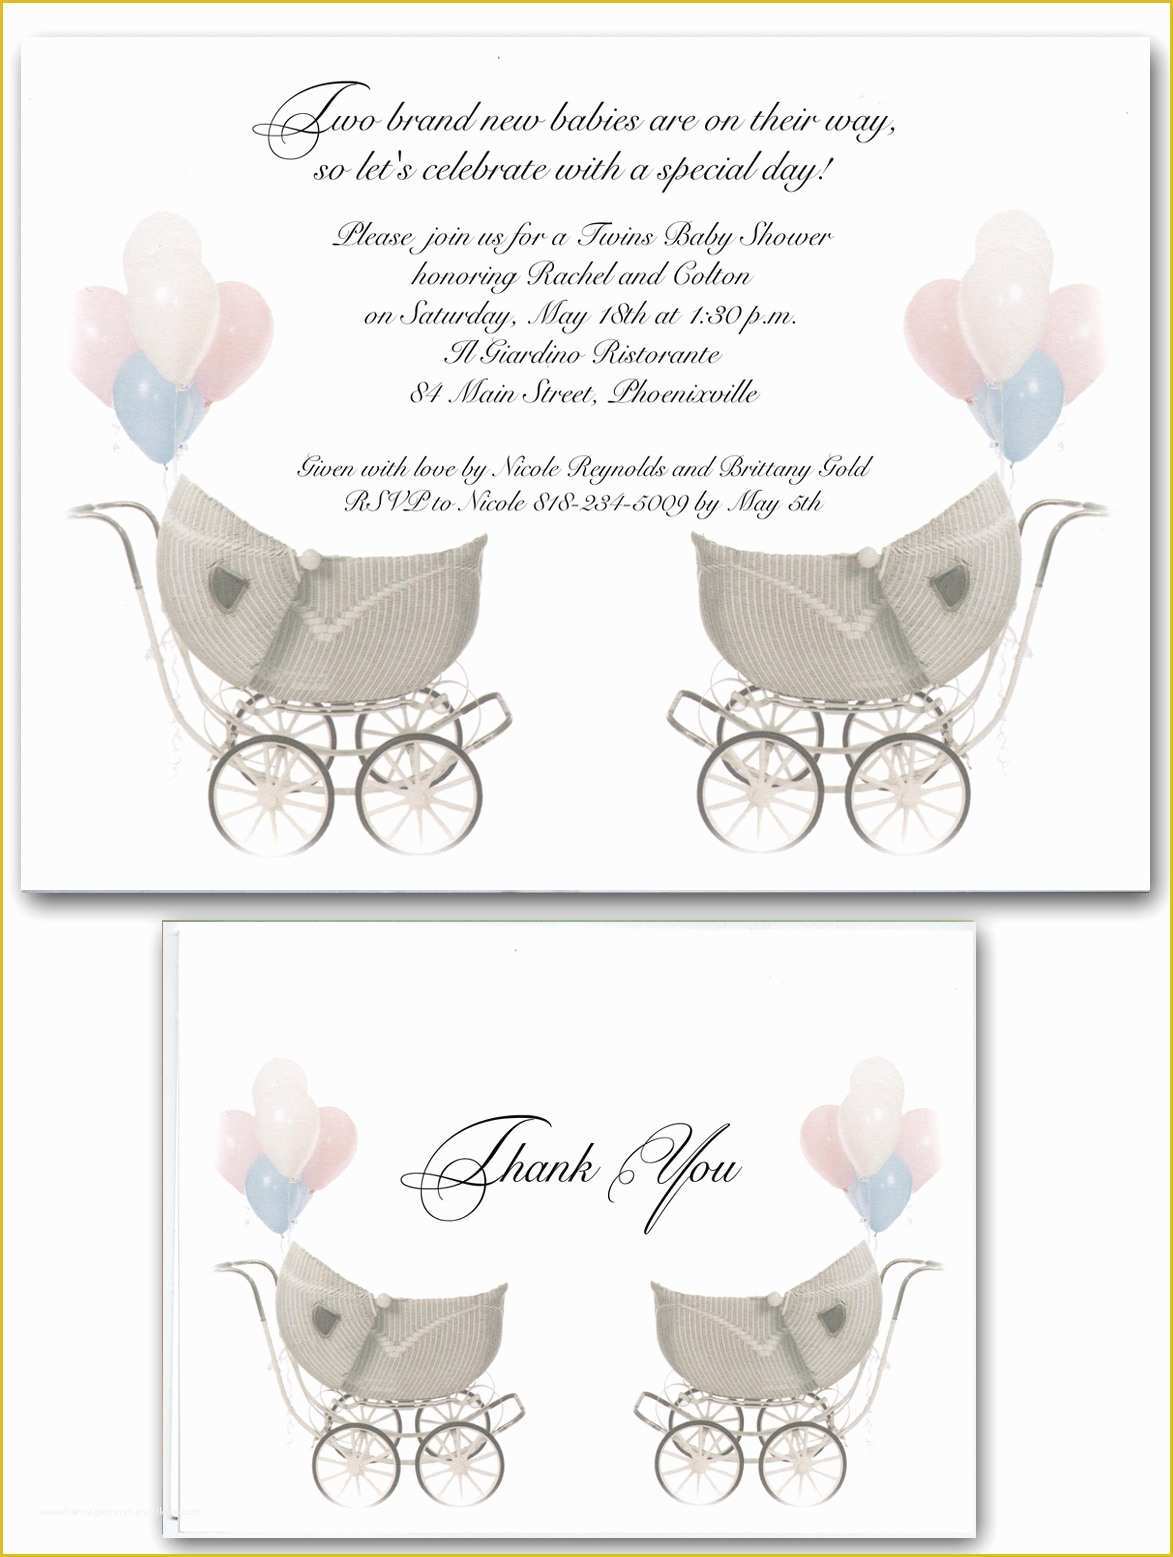 Twin Baby Shower Invitations Templates Free Of Twin Baby Shower Invitation Templates